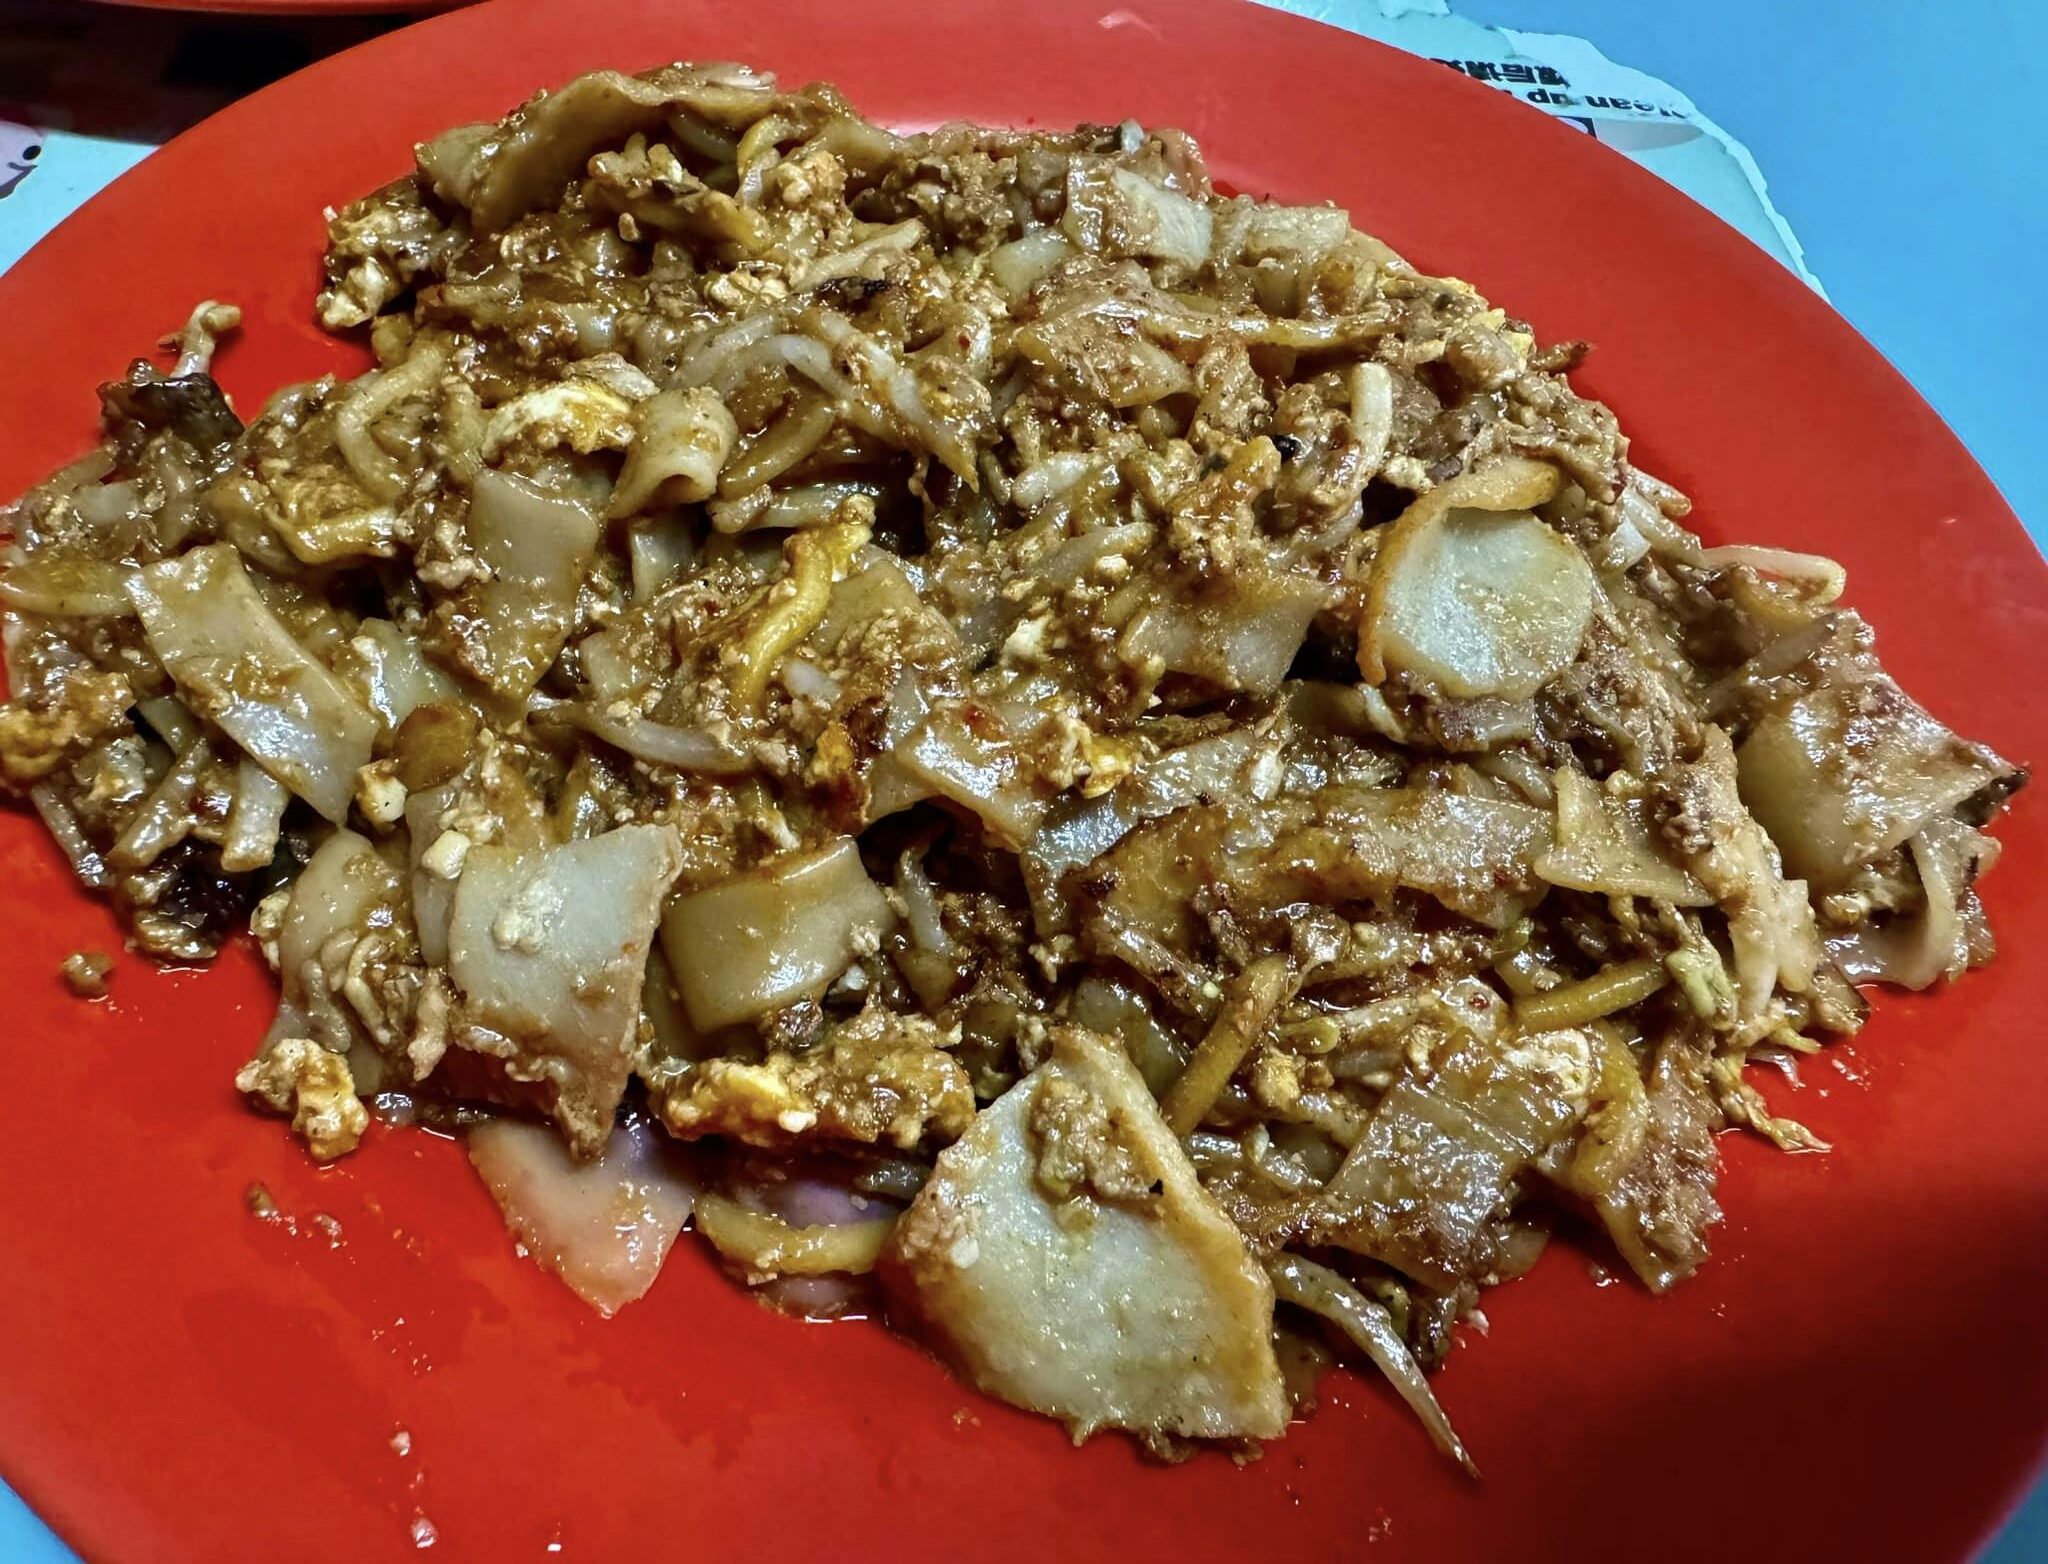 Outram Park Fried Kway Teow Mee is Good